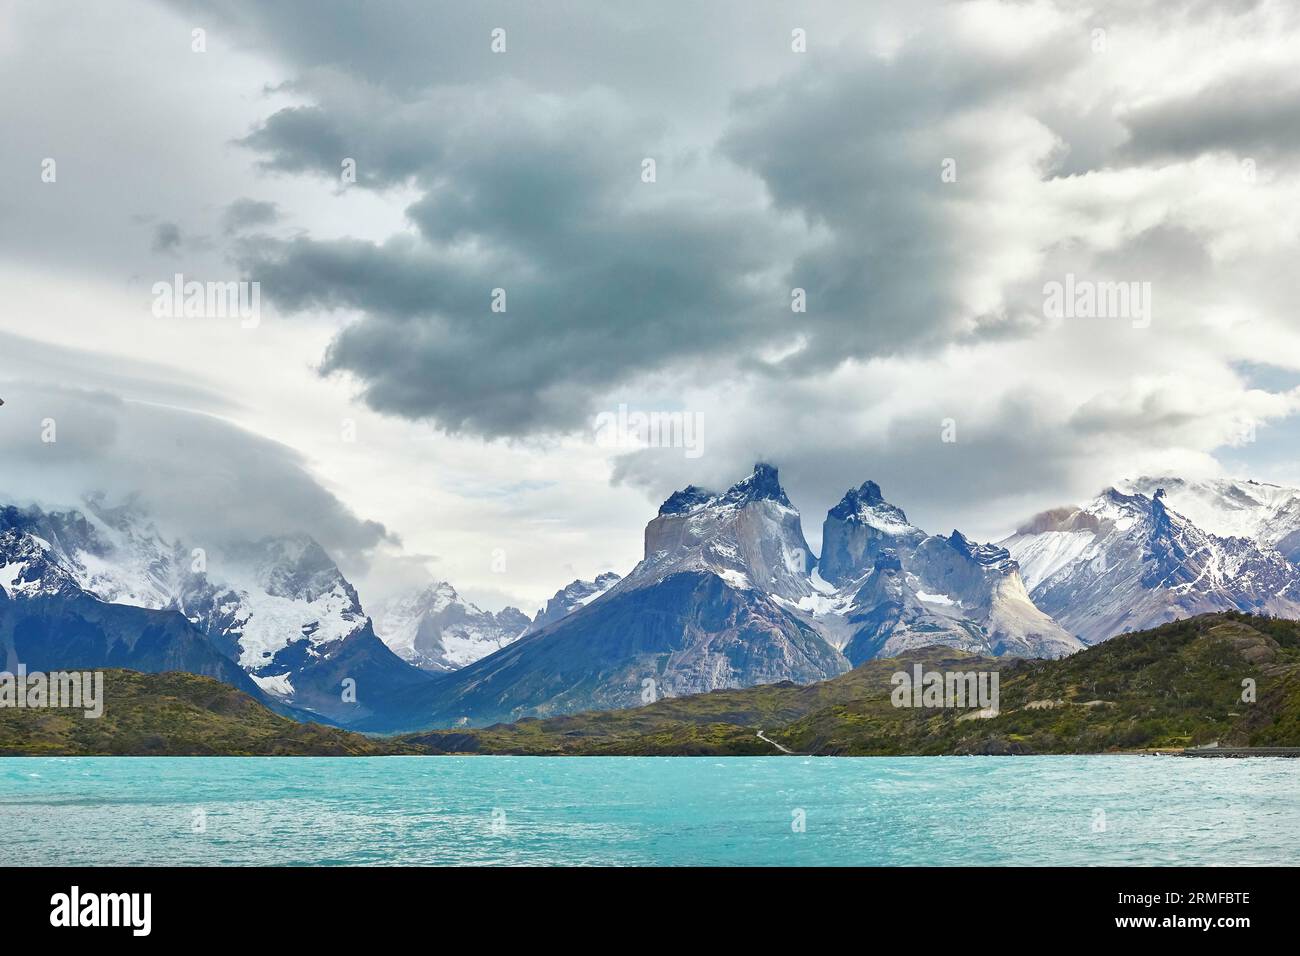 Scenic view of Cuernos del Paine mountains in Torres del Paine national park, Chile Stock Photo